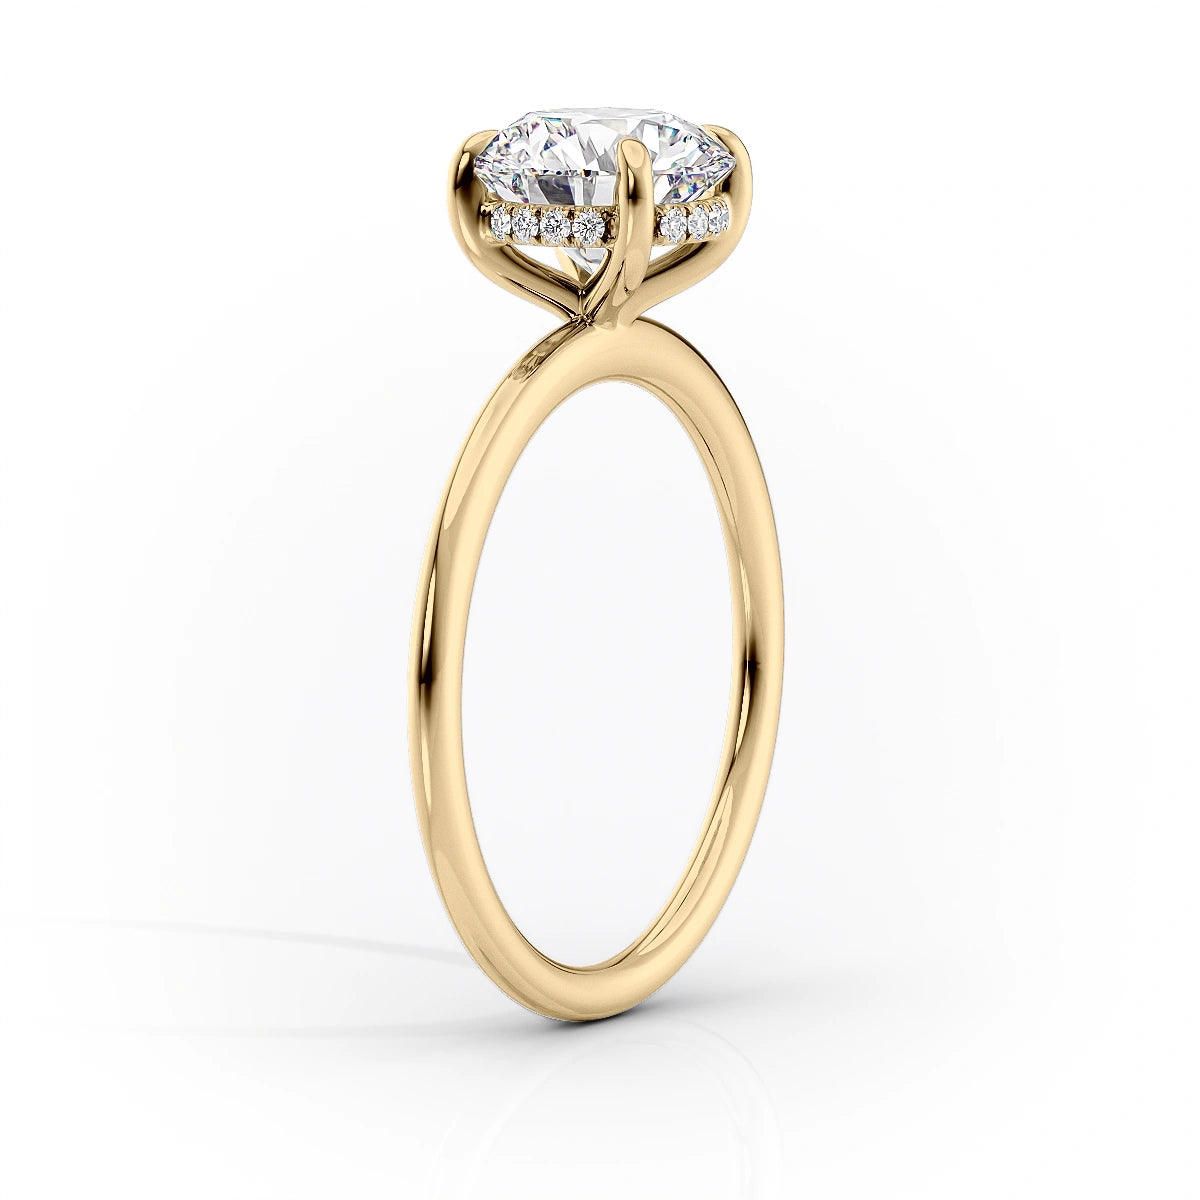 Gold Store Jewelry|women's 24k Gold-filled Engagement Ring Set With Cz  Diamonds